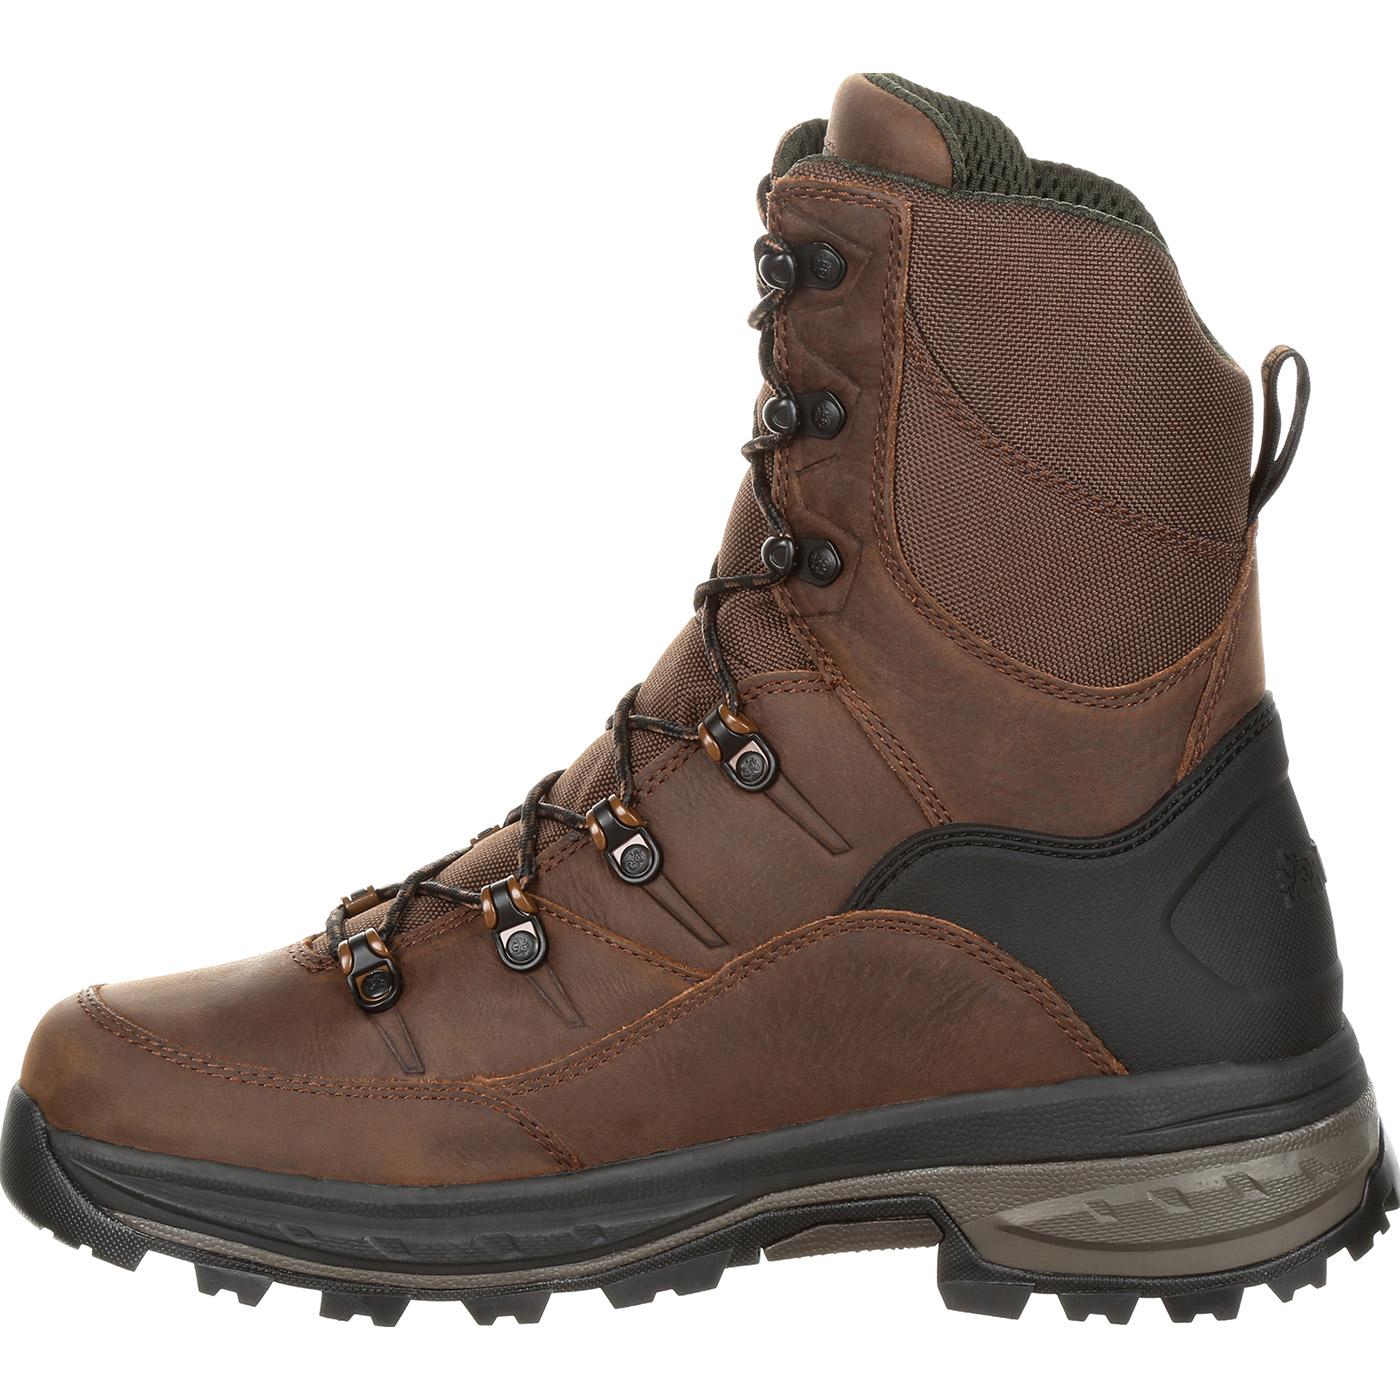 Rocky Grizzly Waterproof Insulated Outdoor Boot, RKS0365